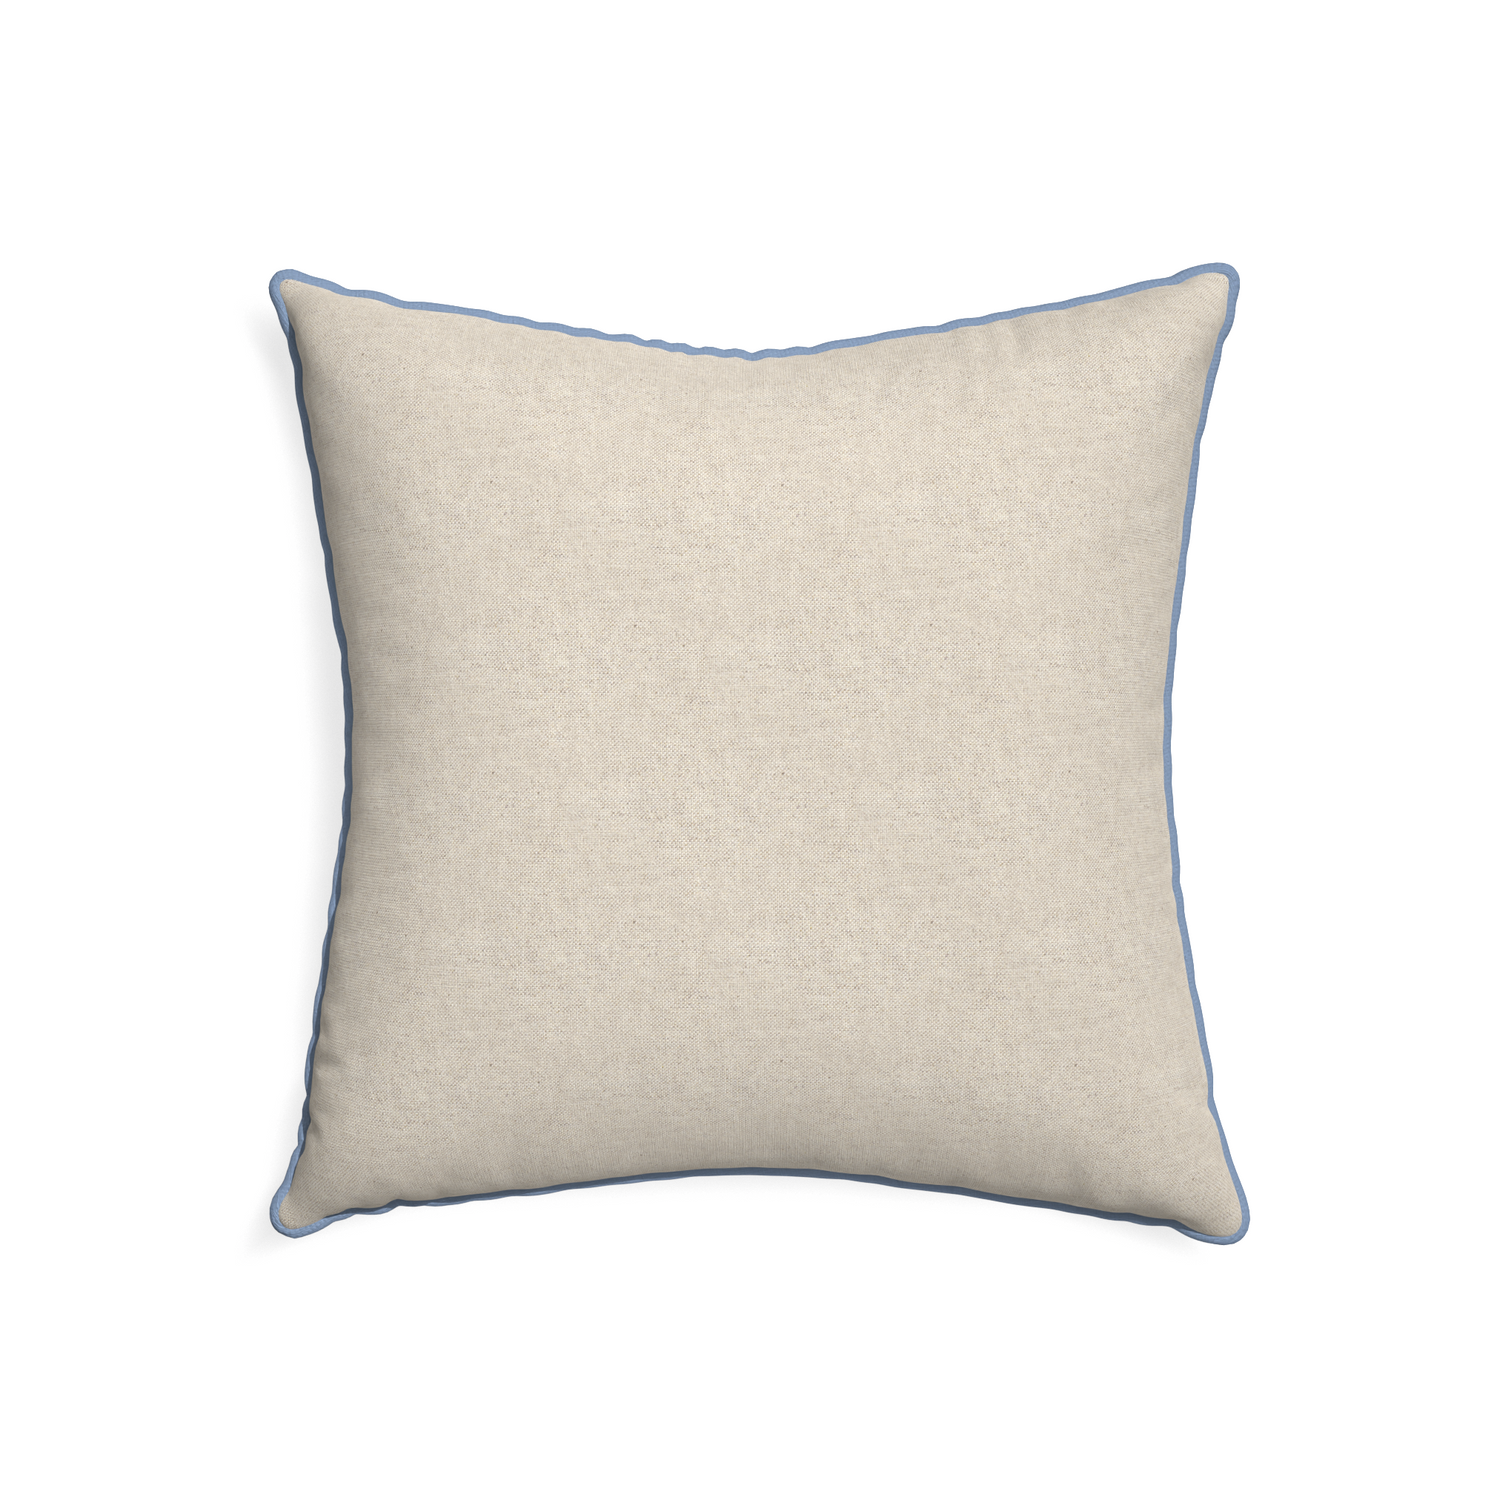 22-square oat custom light brownpillow with sky piping on white background